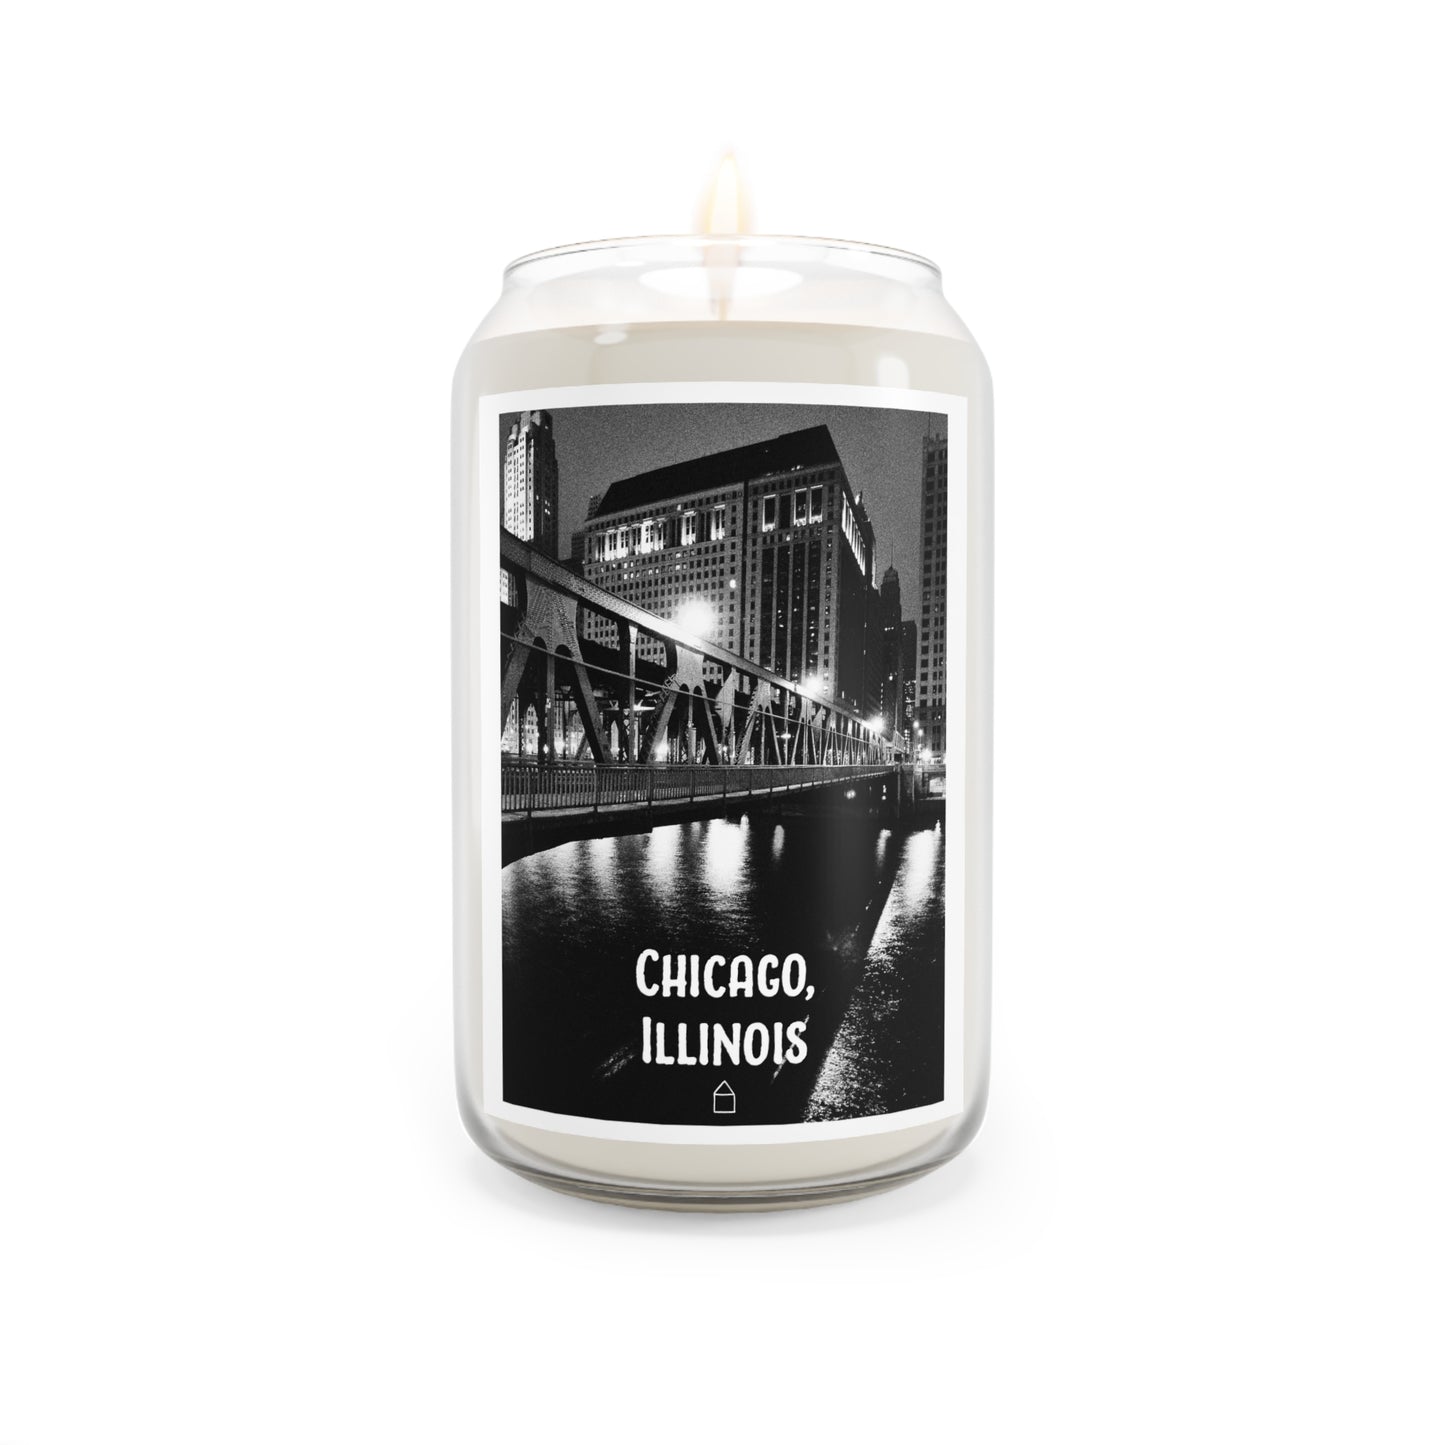 Chicago, Illinois (#013) - Home Town Candles, 13.75oz